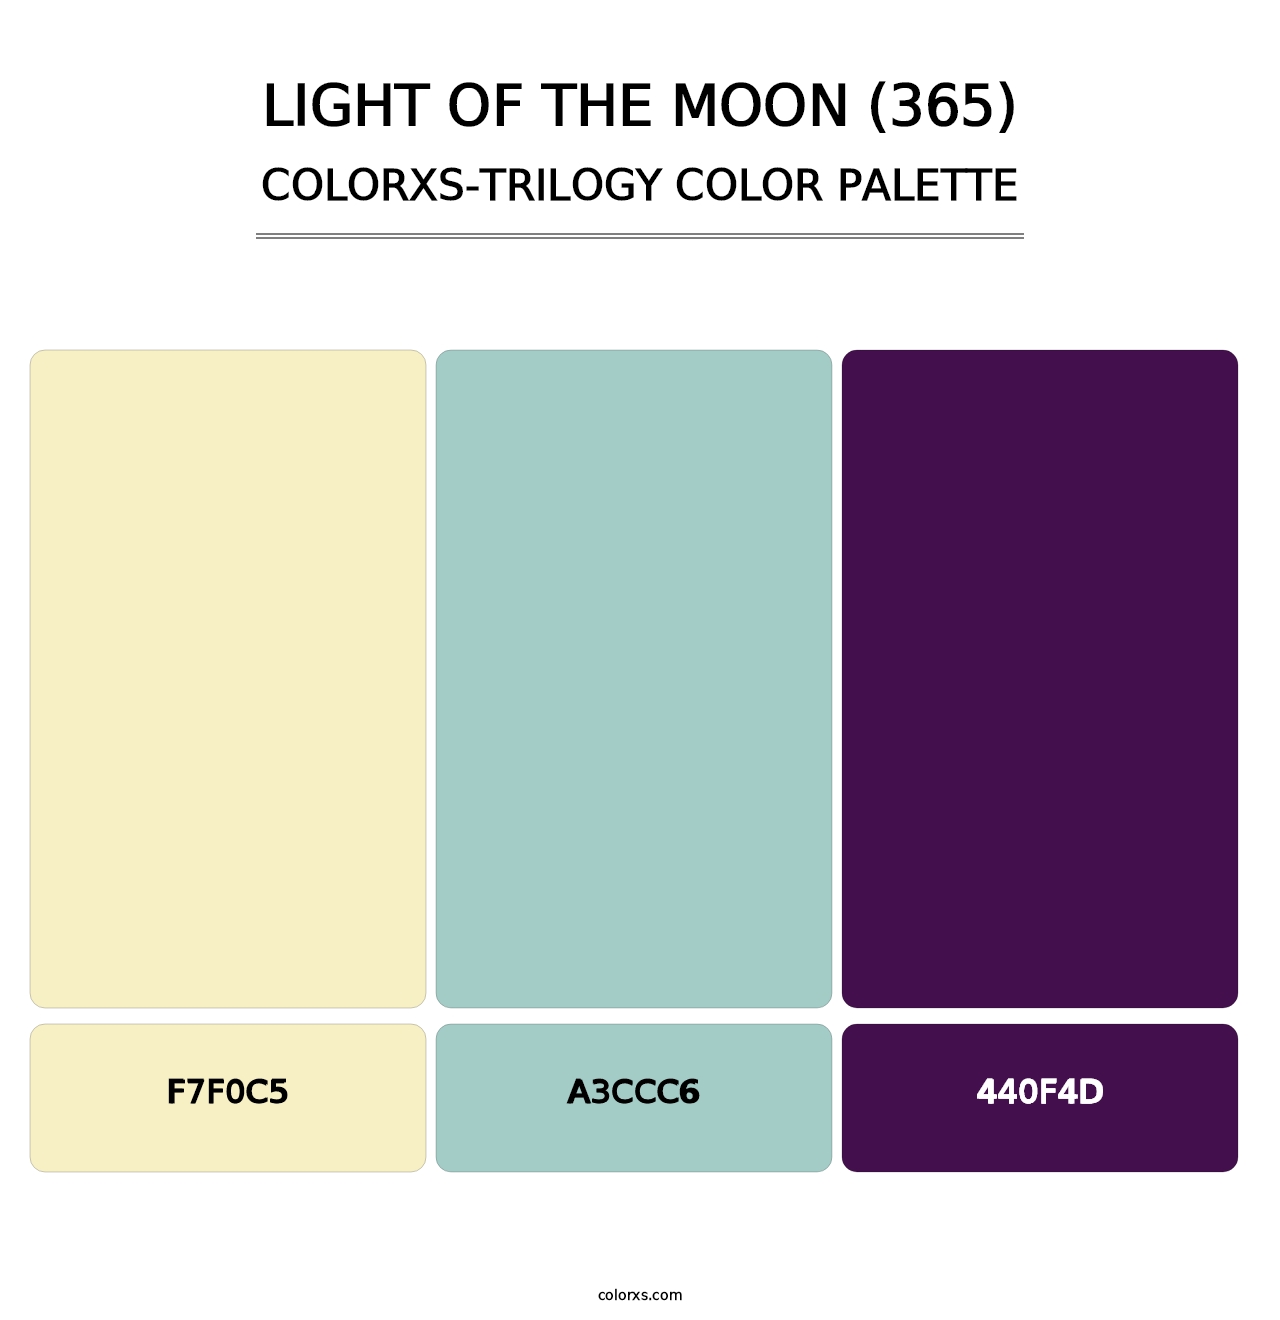 Light of the Moon (365) - Colorxs Trilogy Palette